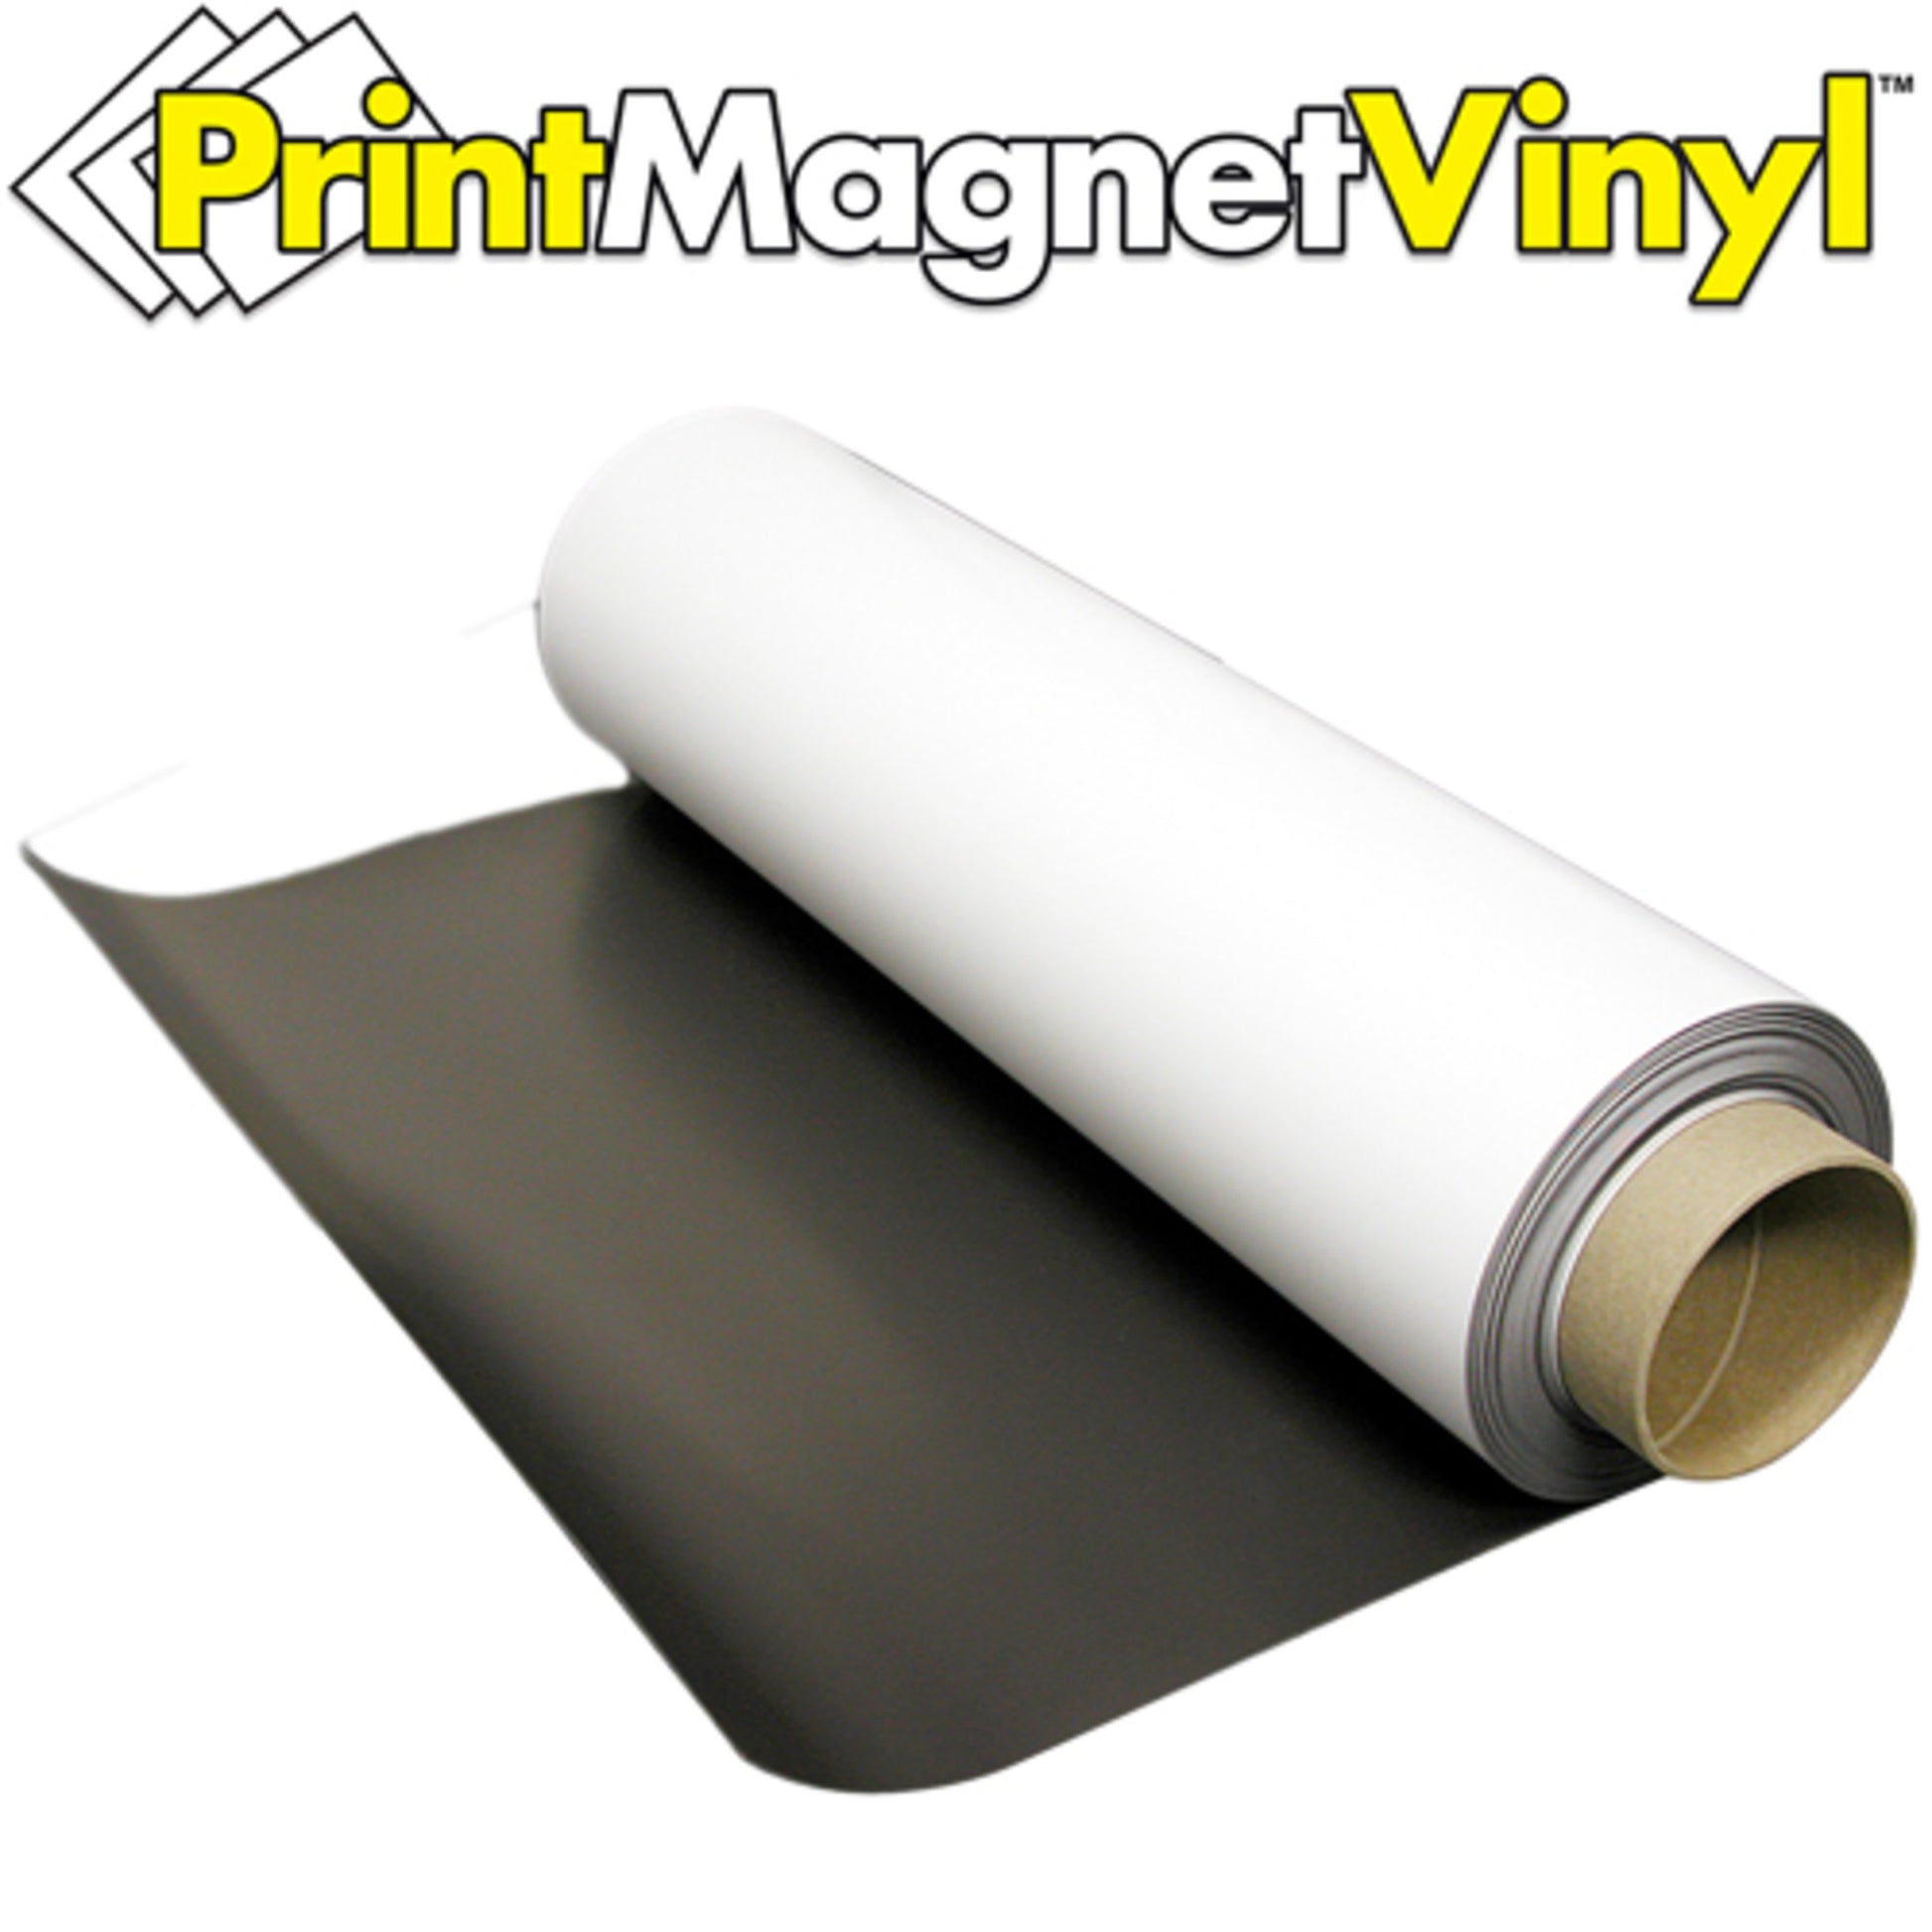 Load image into Gallery viewer, ZGN2024GW10 PrintMagnetVinyl™ Flexible Magnetic Sheet - 45 Degree Angle View